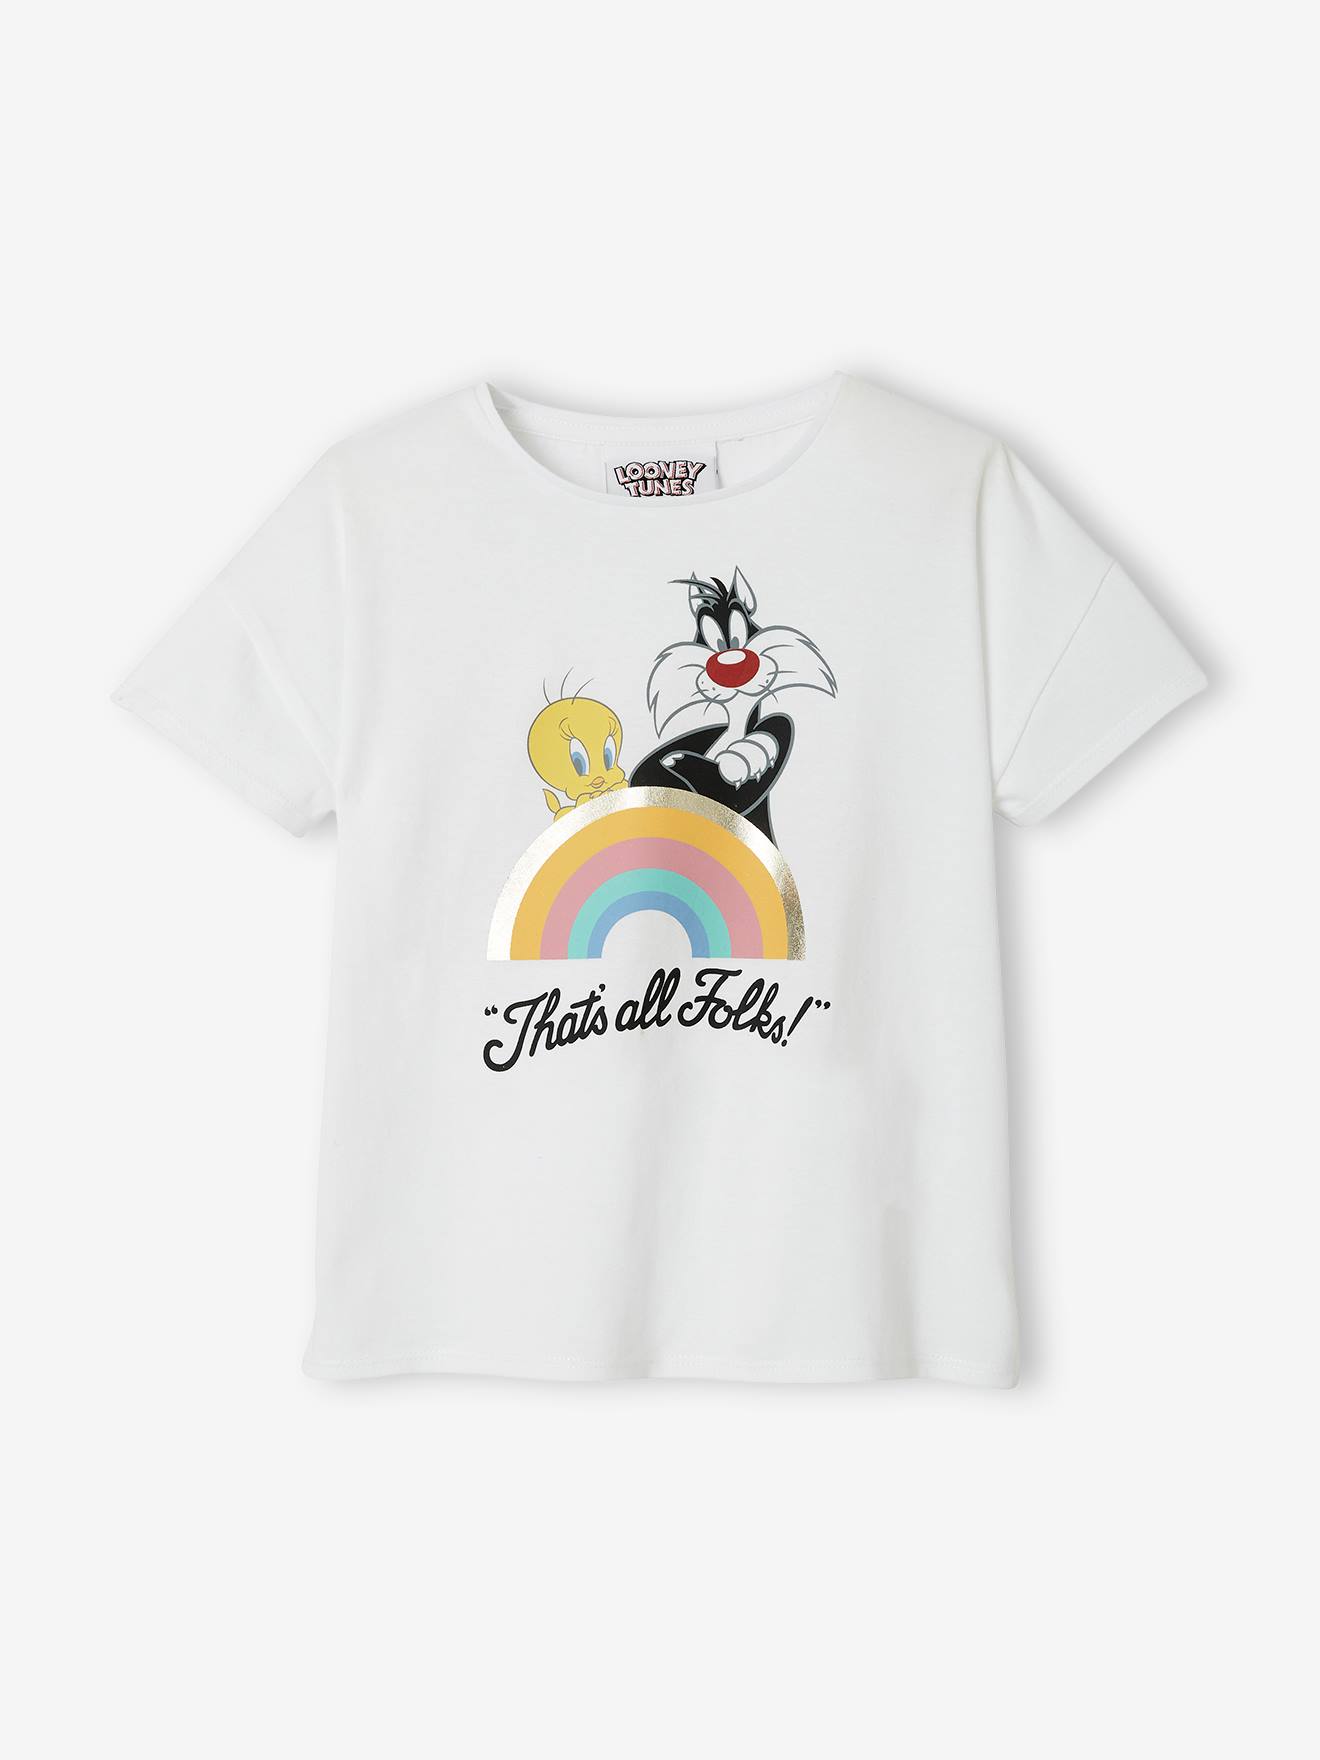 Tunes® T-Shirt & Tweety with design, - Looney solid Girls for Girls white Sylvester light